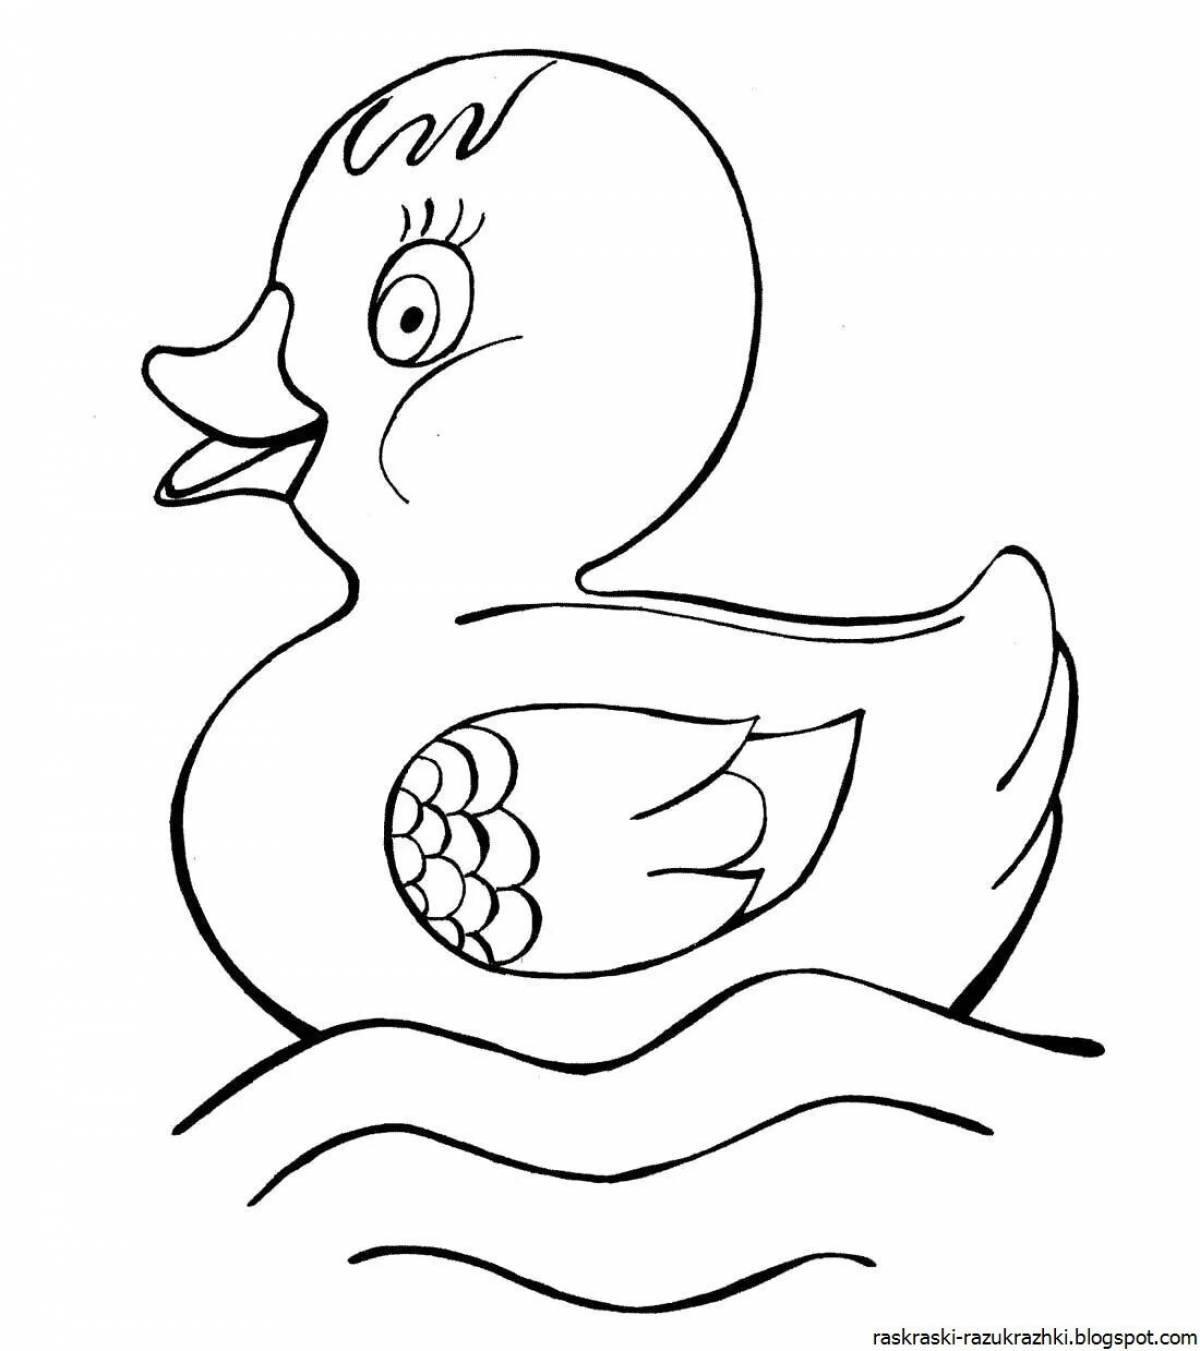 Colorful duck coloring book for children 3-4 years old